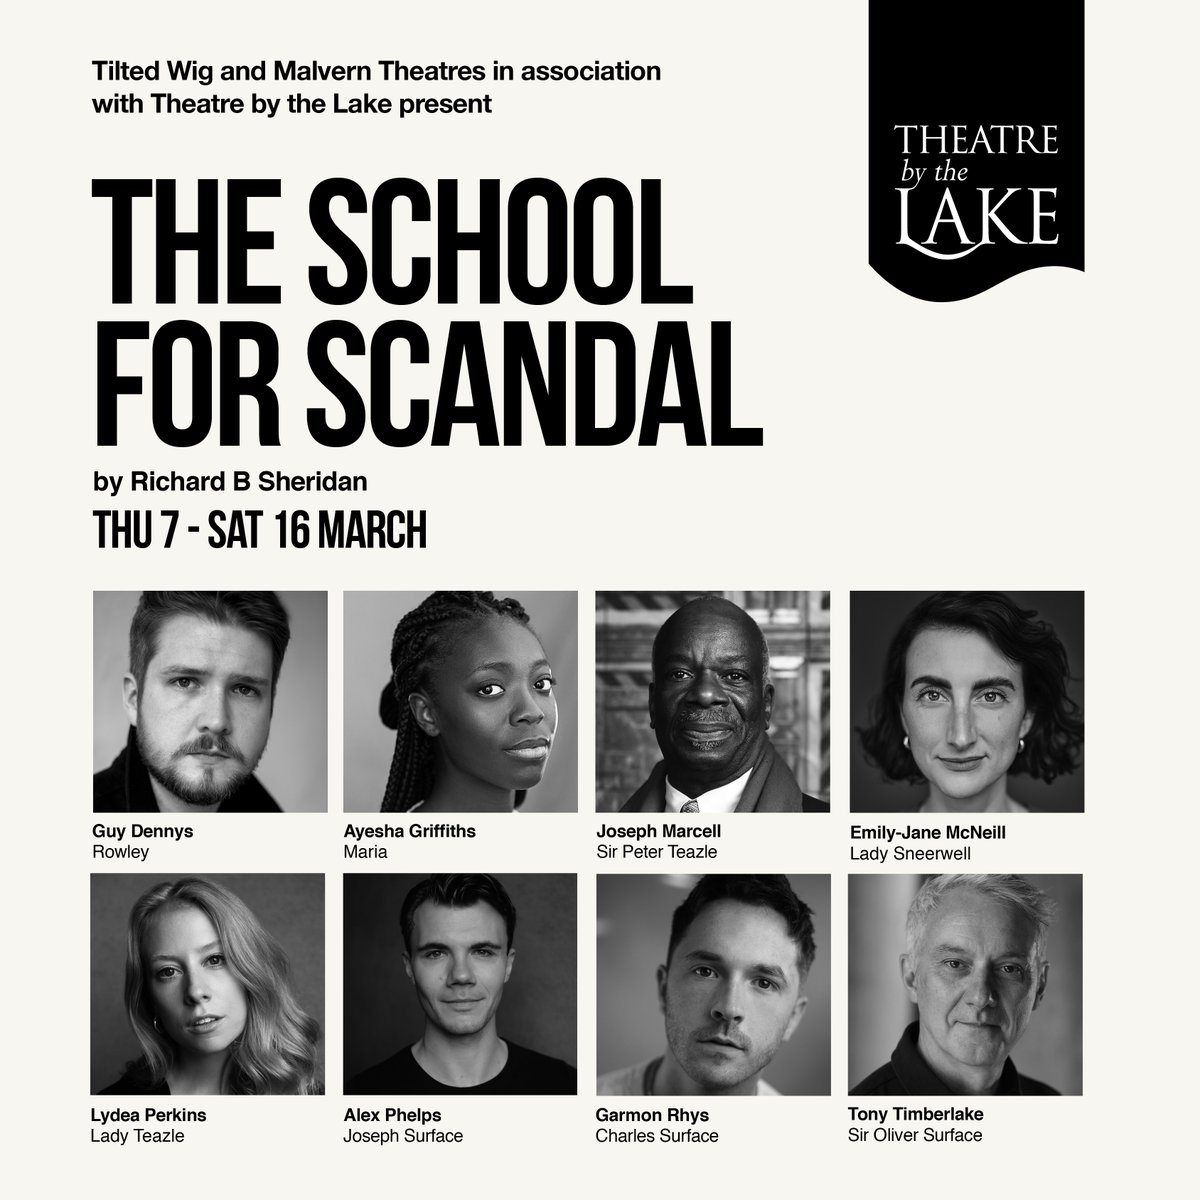 It's Opening Night and the building is rife with furtive glances, secret whispers and much laughter as we prepare ourselves for The School for Scandal!

So here's a big huzzah for this deliciously naughty and outrageously silly cast of nine!

bit.ly/TBTLScandal 
#TBTL2024